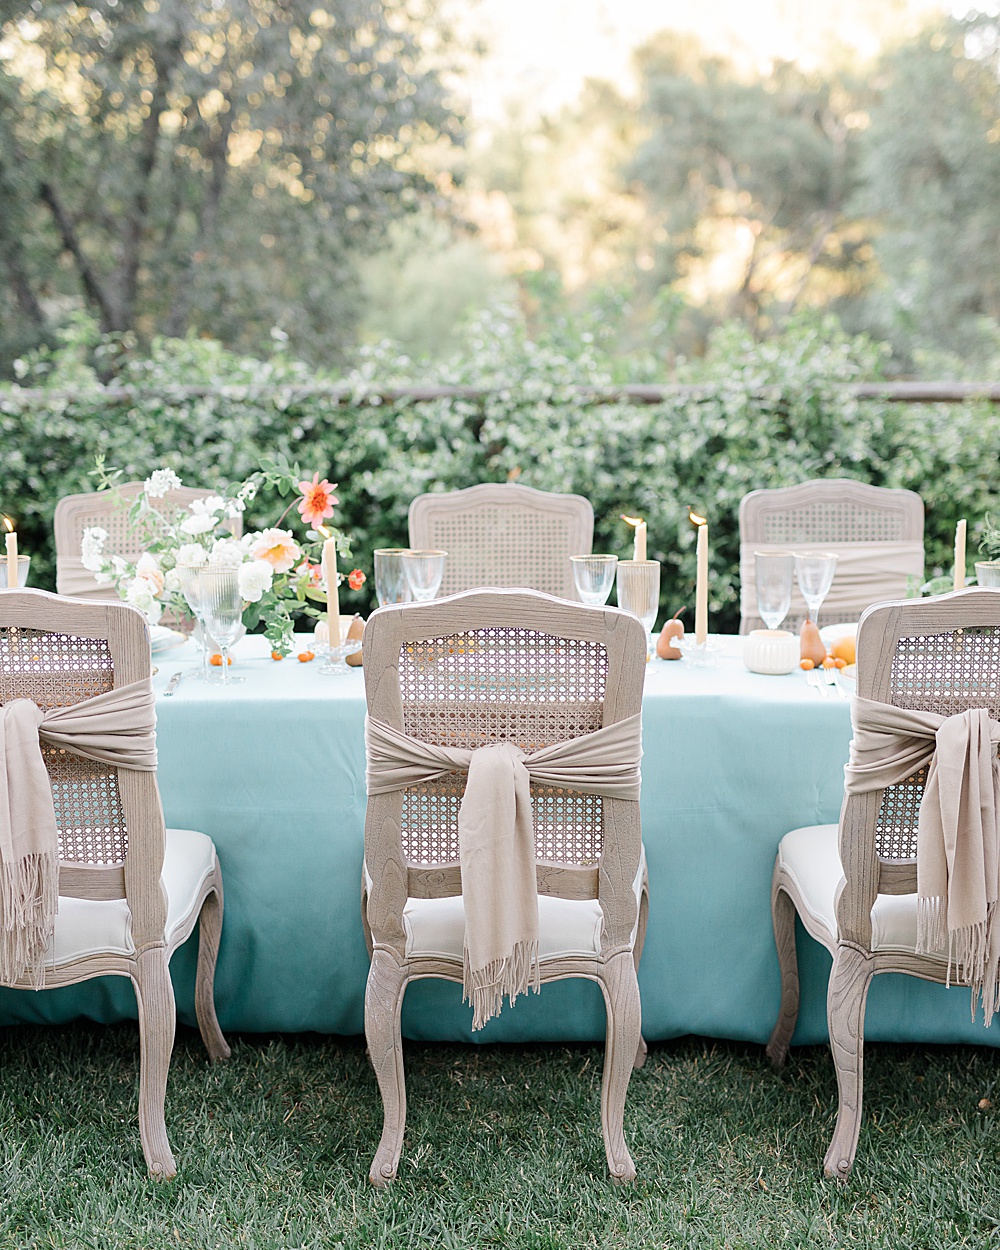 scarves wrapped around chairs for a rehearsal dinner